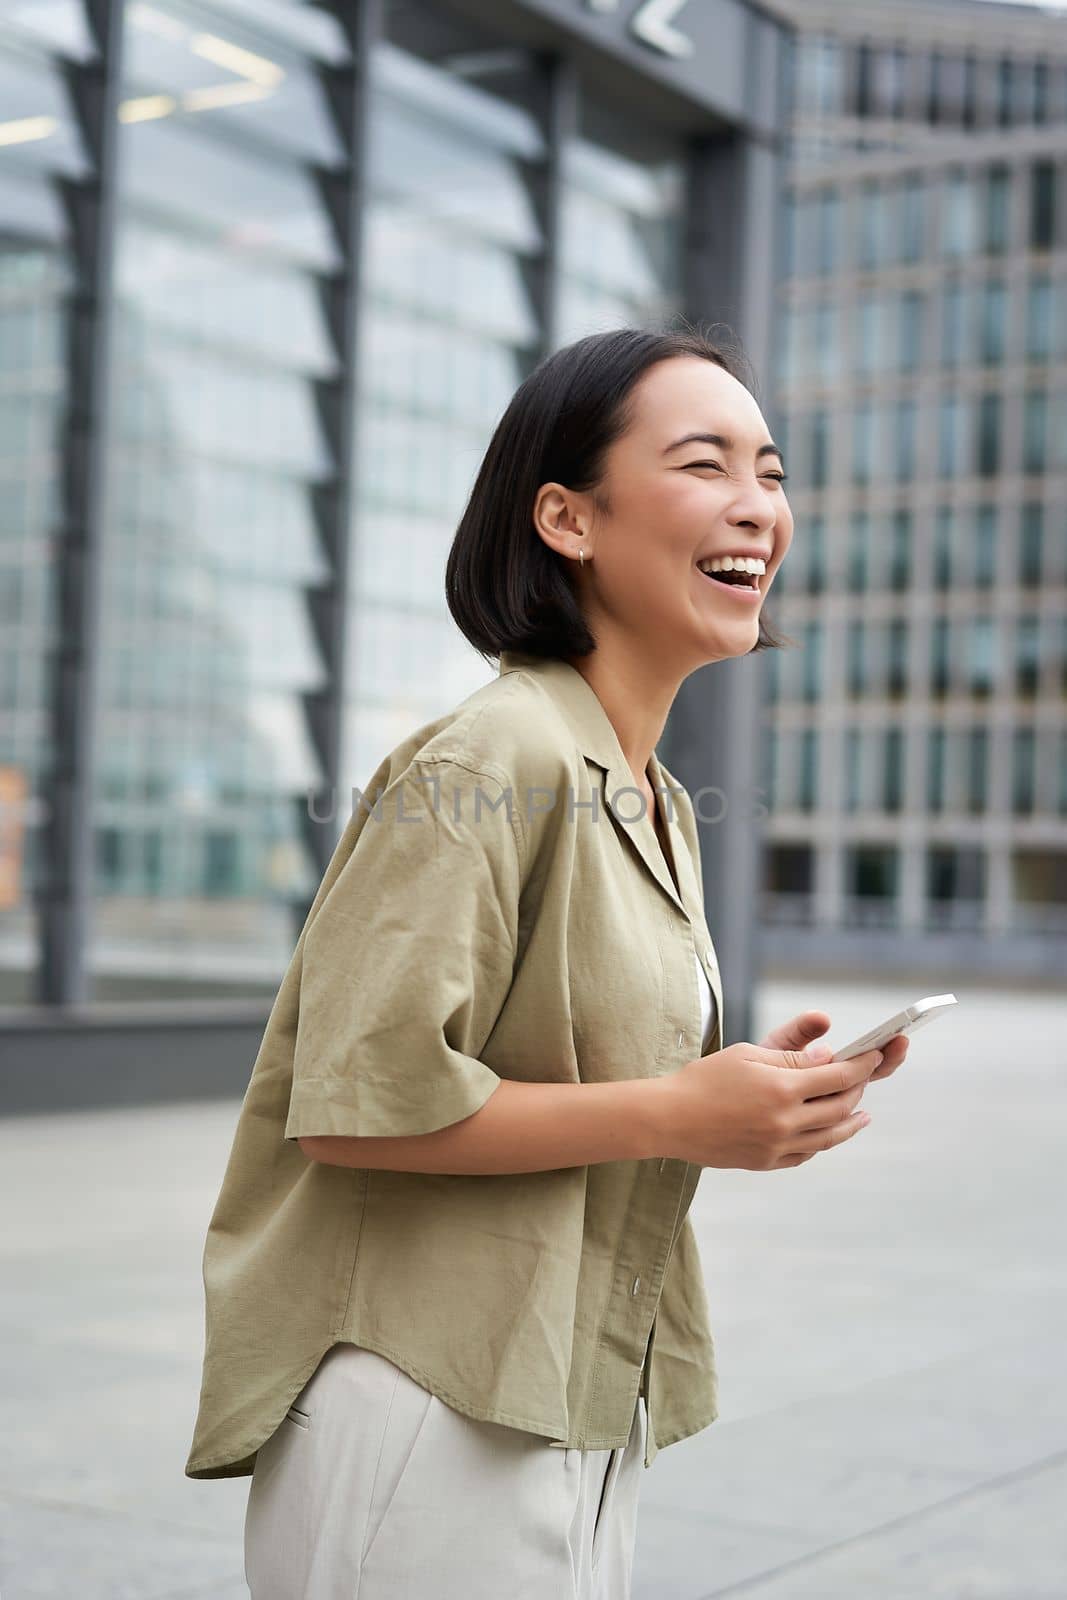 Vertical shot of beautiful asian woman walking on street, laughing and looking happy, enjoying the day.